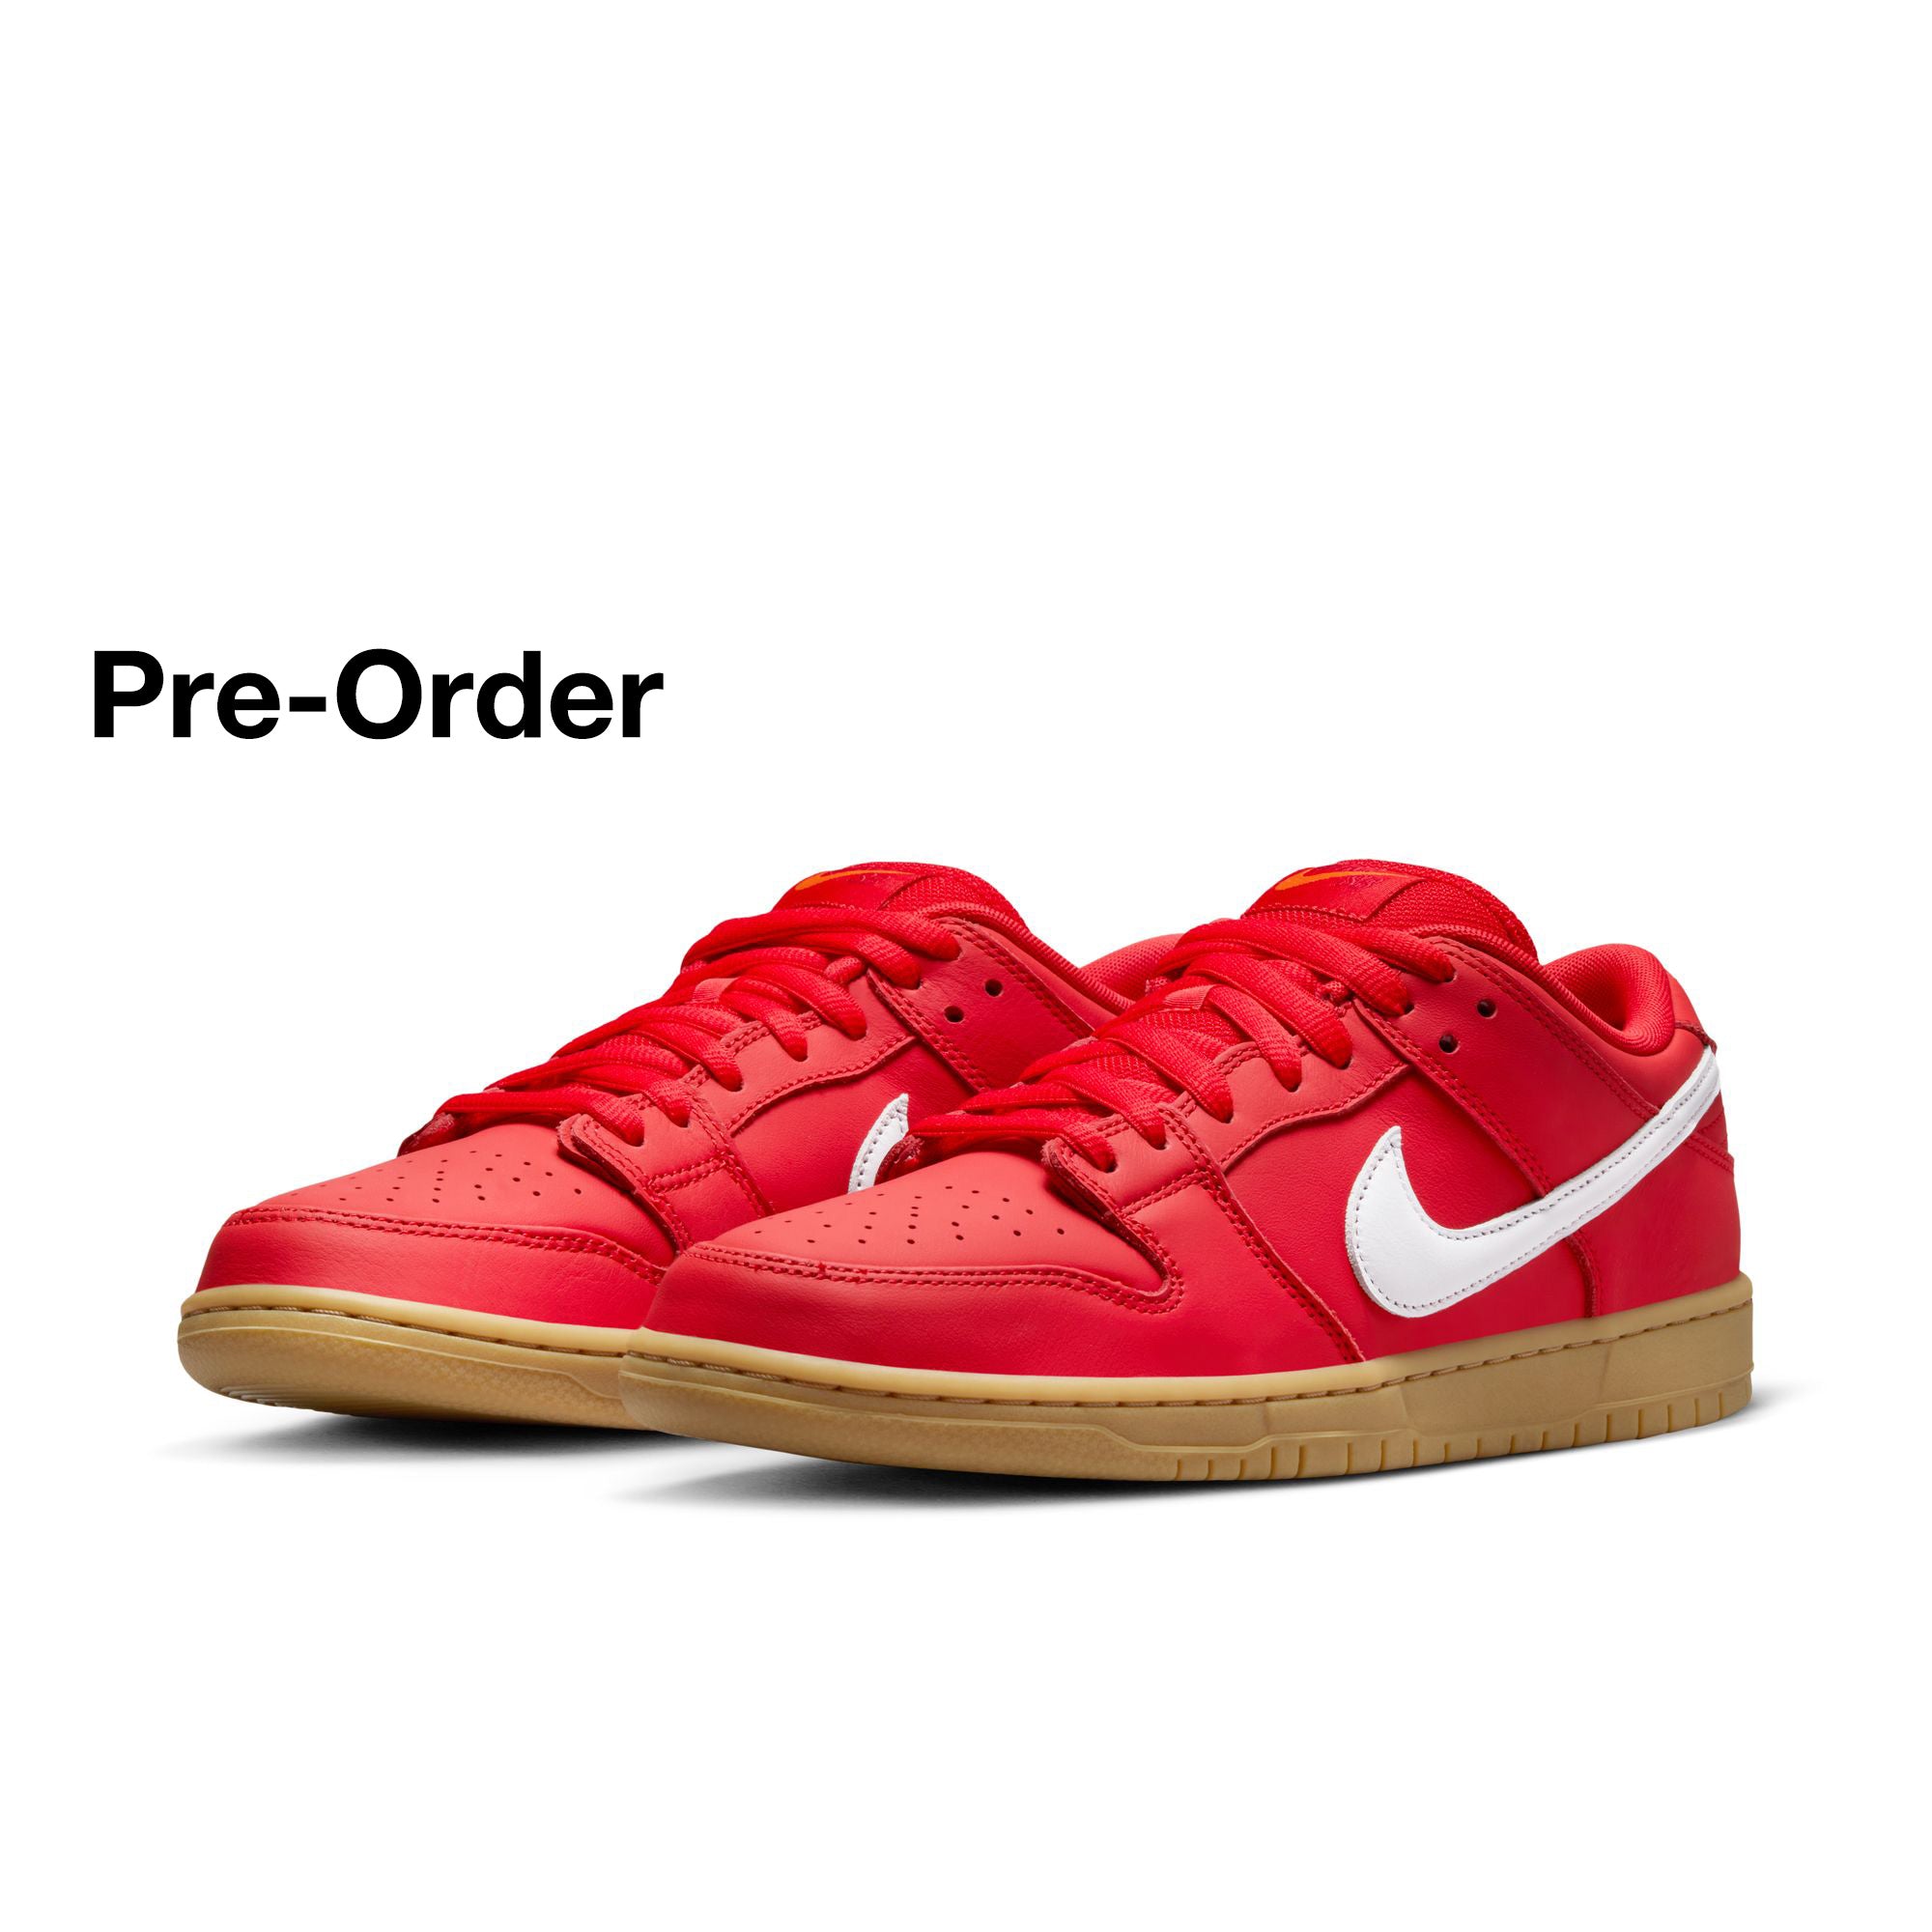 Nike SB Dunk Low Pro ISO Shoes - University Red/White PRE-ORDER